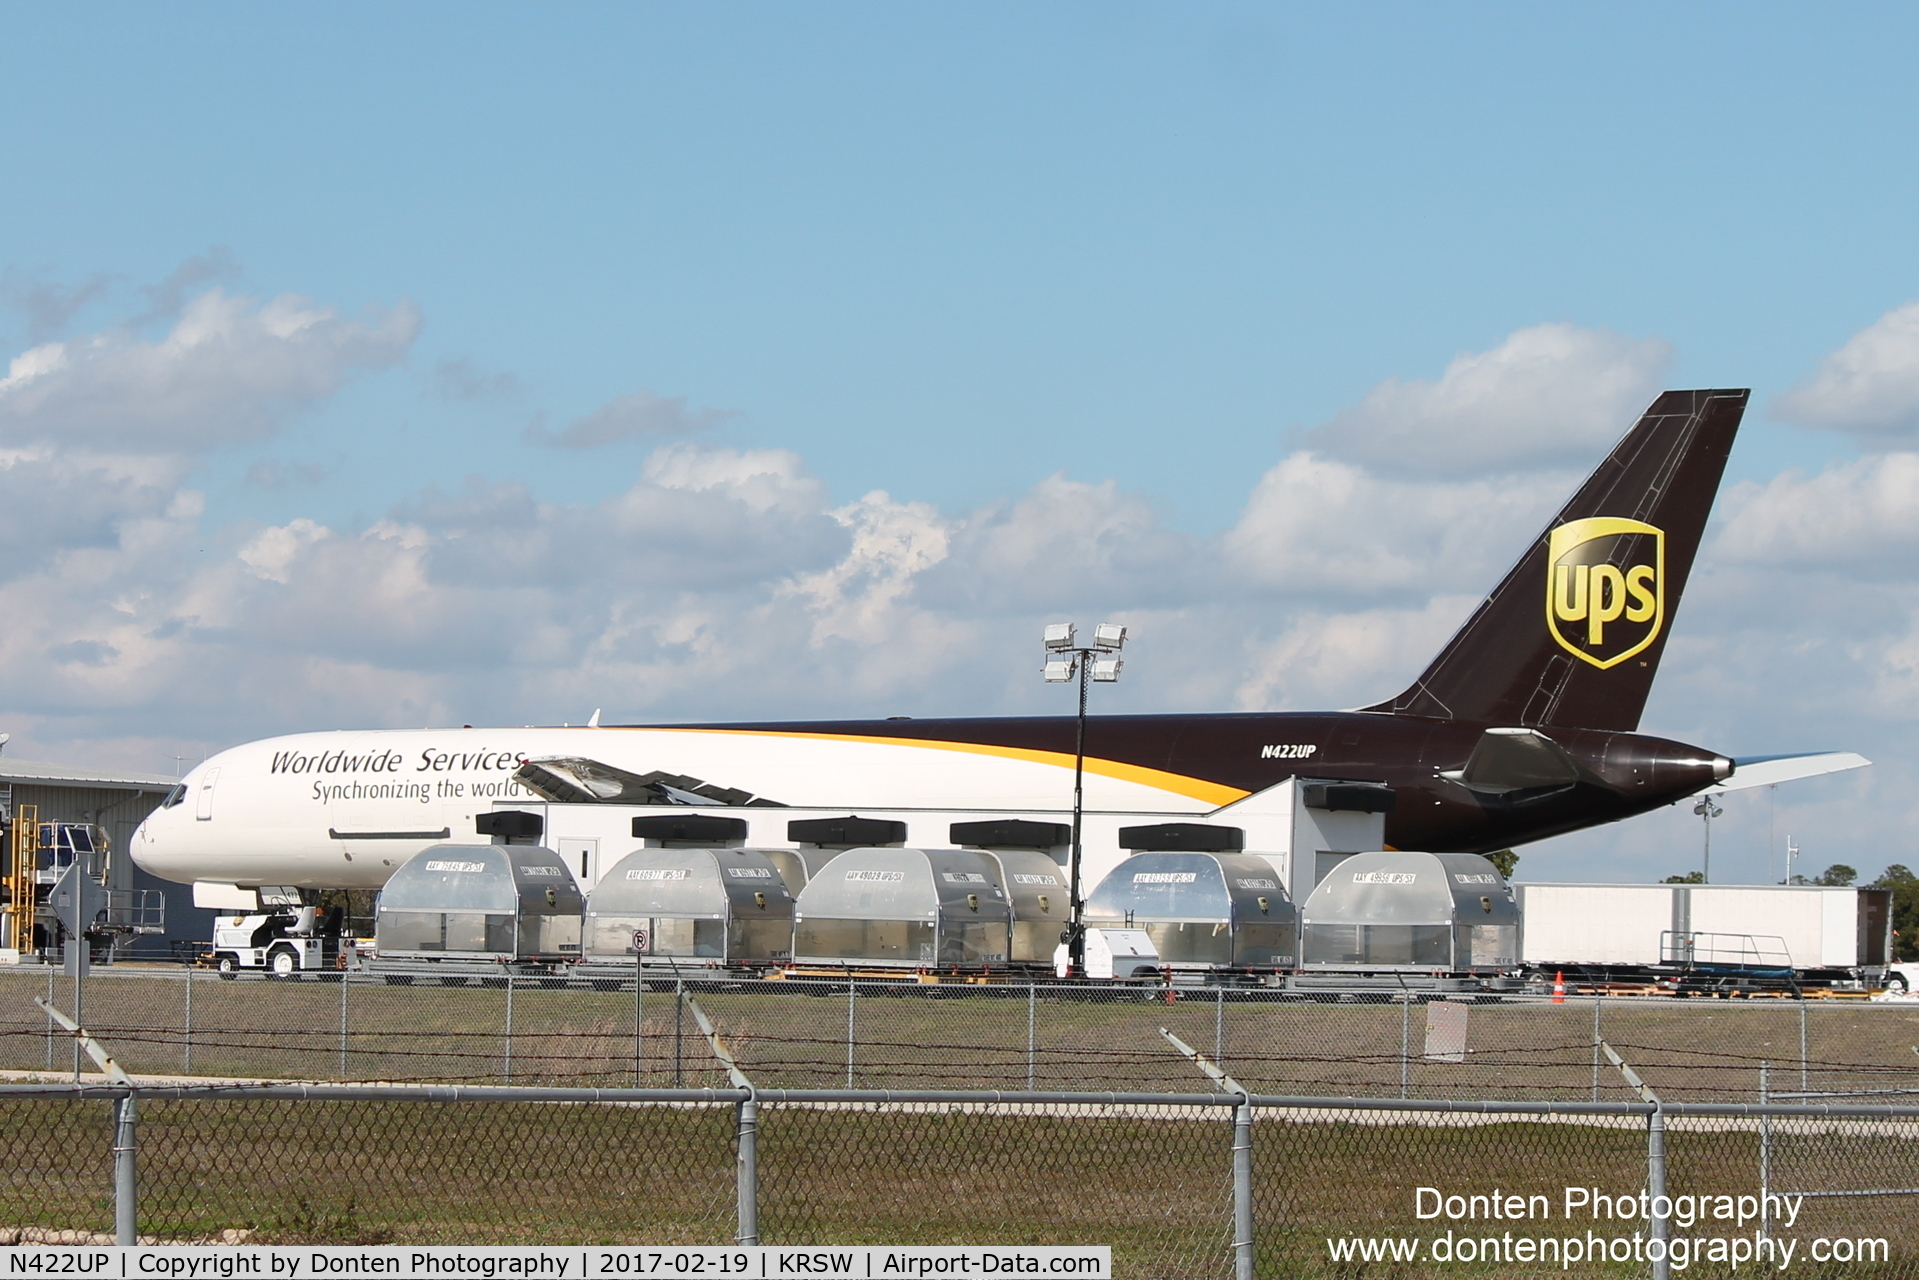 N422UP, 1991 Boeing 757-24APF C/N 25324, UPS Cargo sits on the cargo ramp at Southwest Florida International Airport